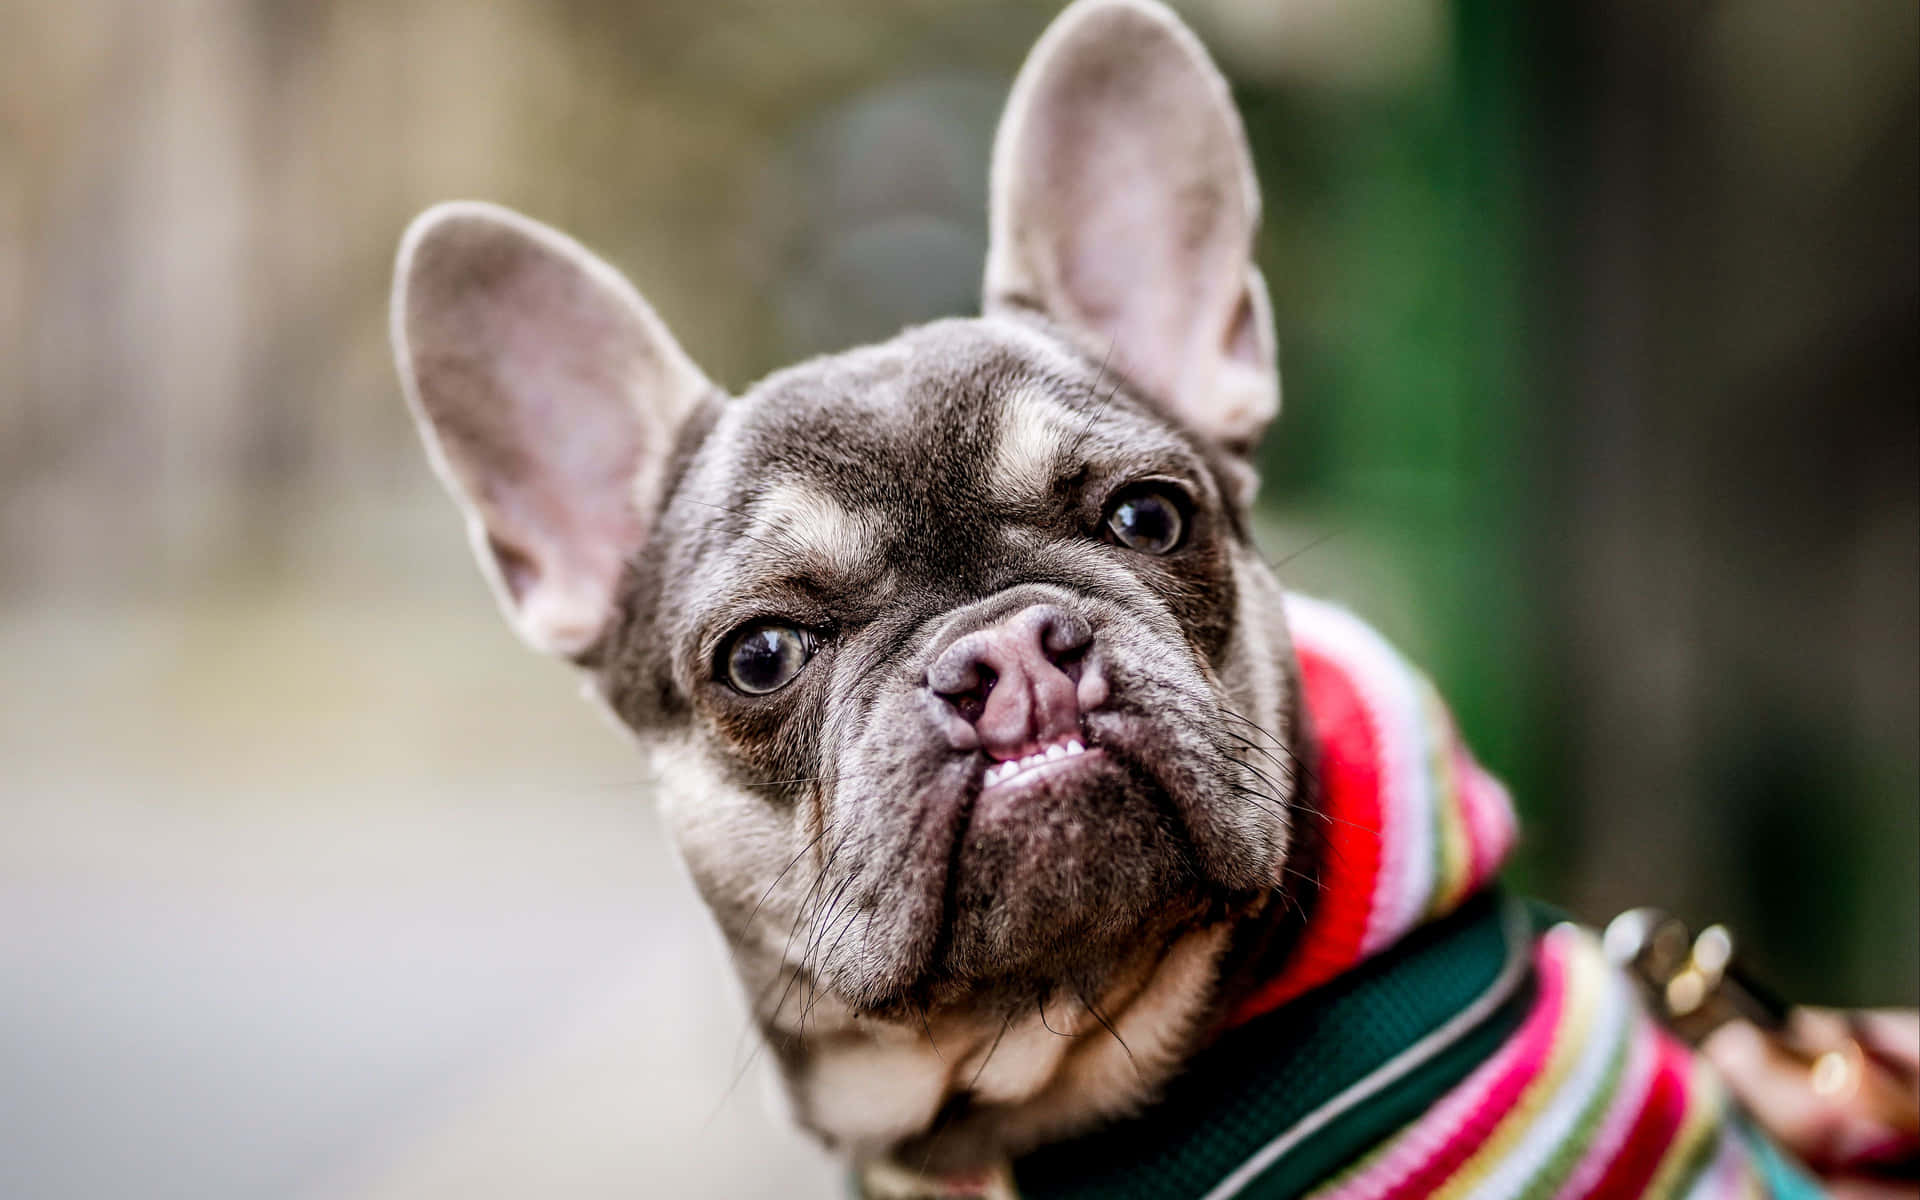 A Small French Bulldog Wearing A Colorful Sweater